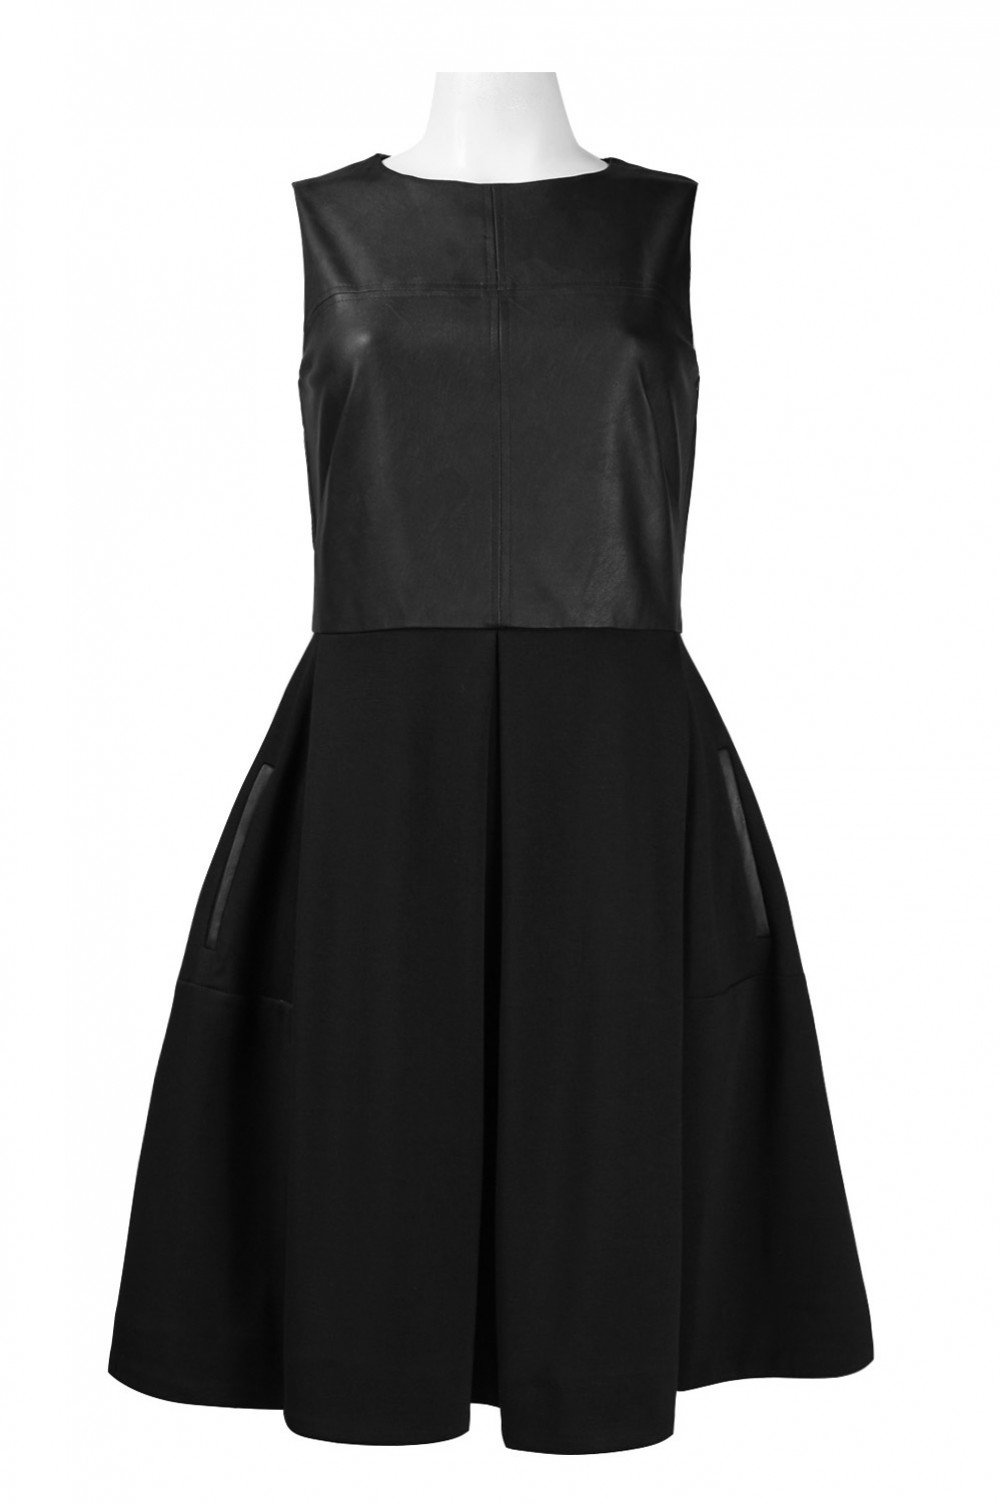 Taylor Black Fit and Flare Vegan Leather Top Dress - Scarfanatics